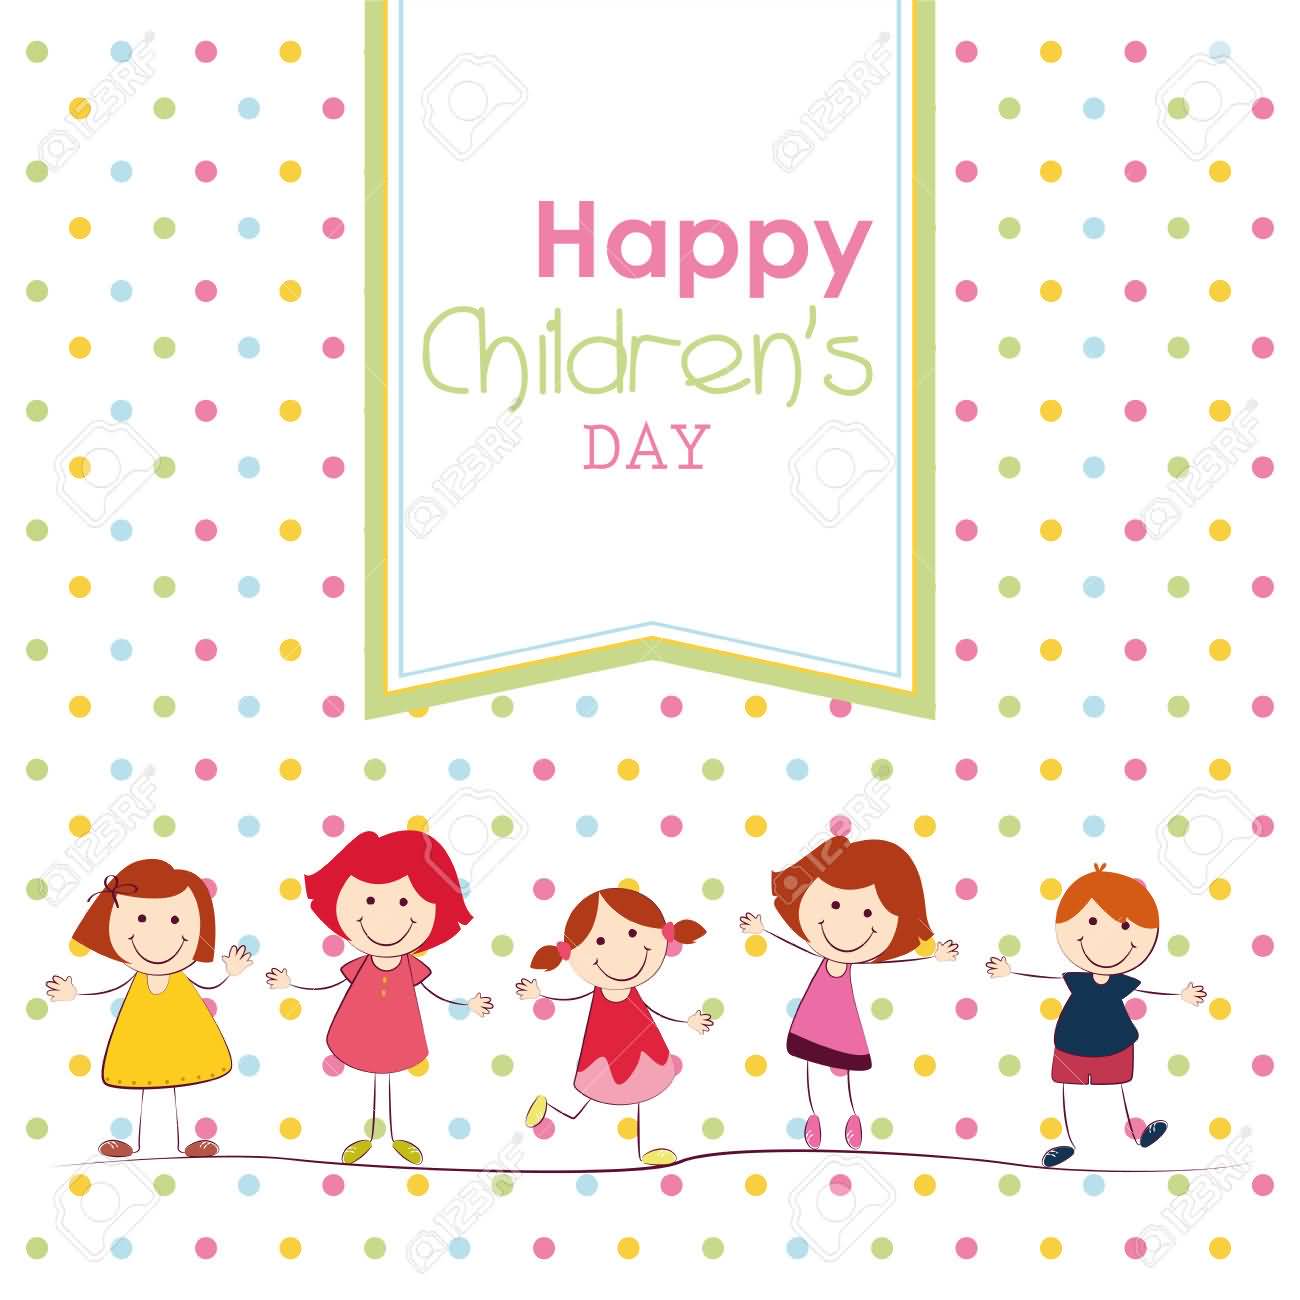 Happy Children's Day Beautiful Greeting Card